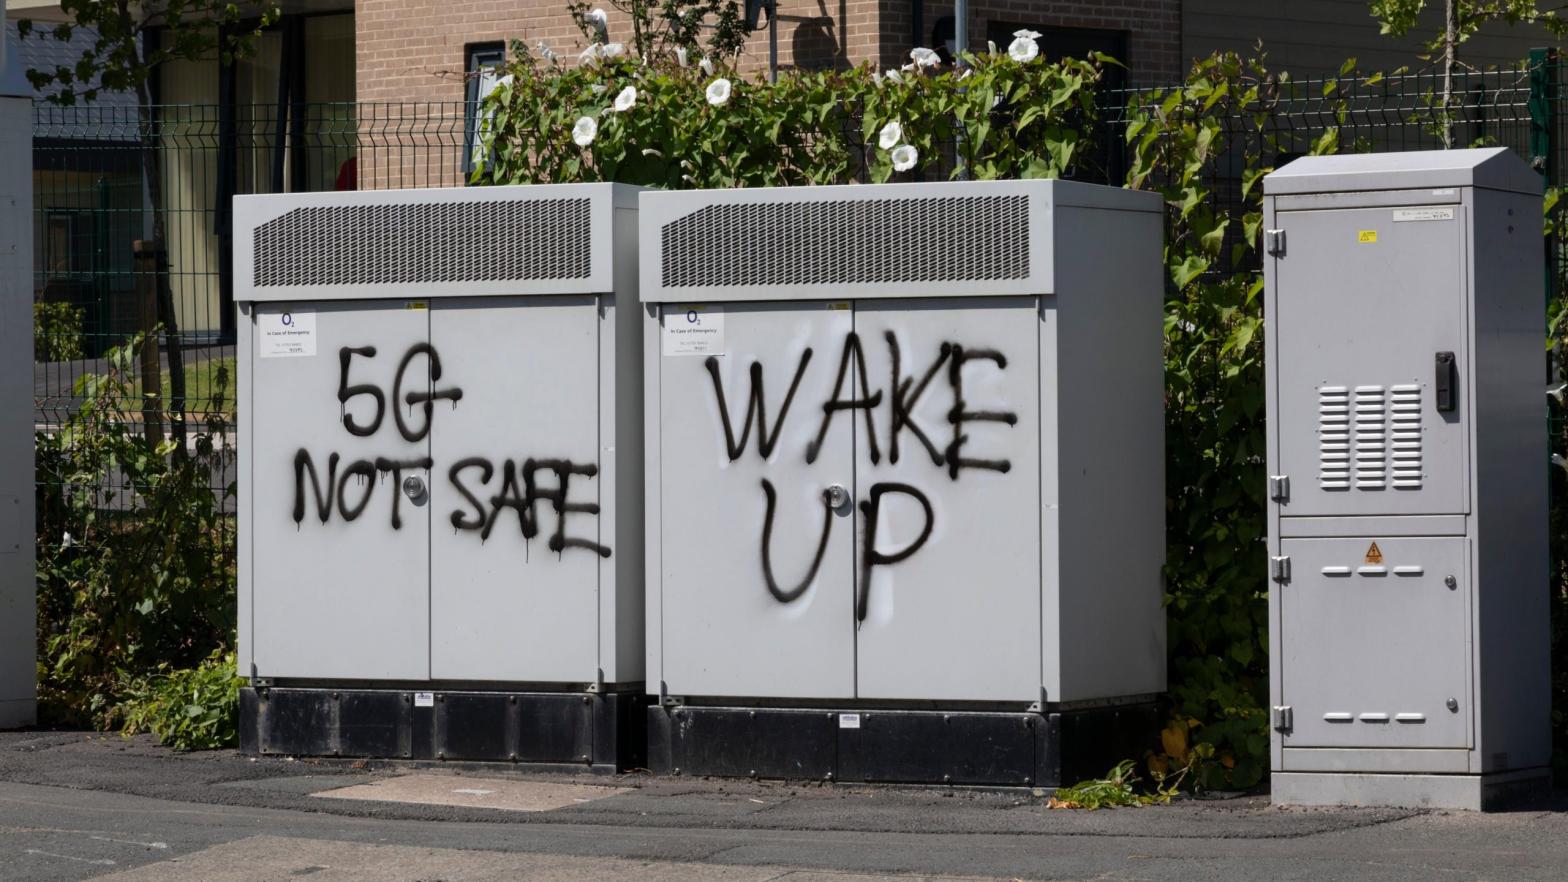 Graffiti on telecom equipment in Batley, the UK, promoting conspiracy theories about 5G connectivity technology in July 2021. (Photo: Daniel Harvey Gonzalez / In Pictures via Getty Images, Getty Images)